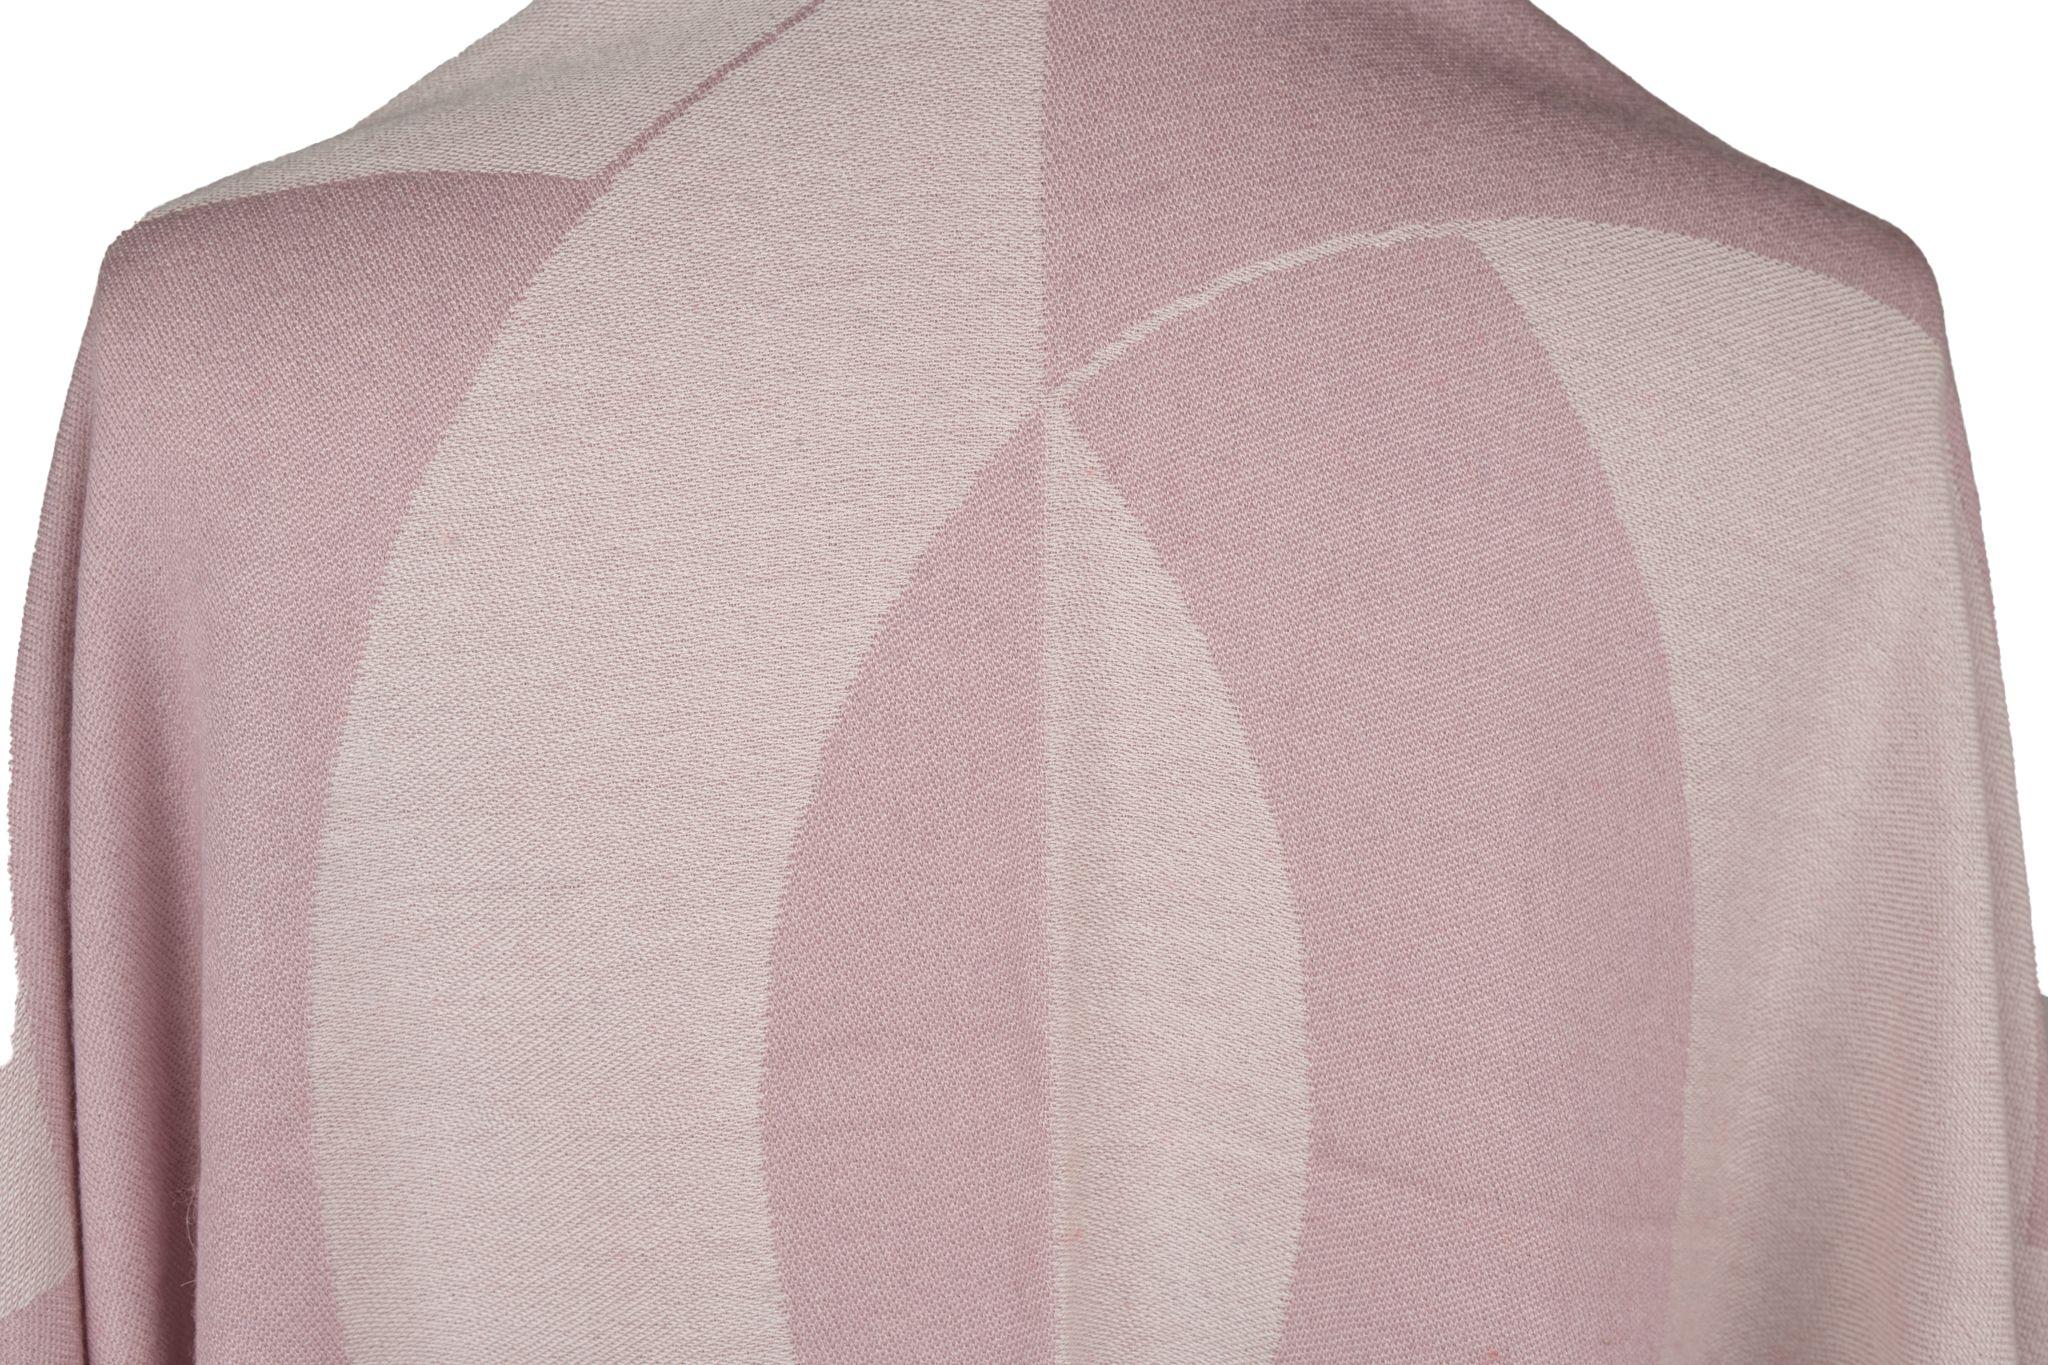 Chanel Cashmere Shawl in Rosé. The pattern features one big CC logo as the center piece. Also Chanel is written on the shawl. The item is in new condition.